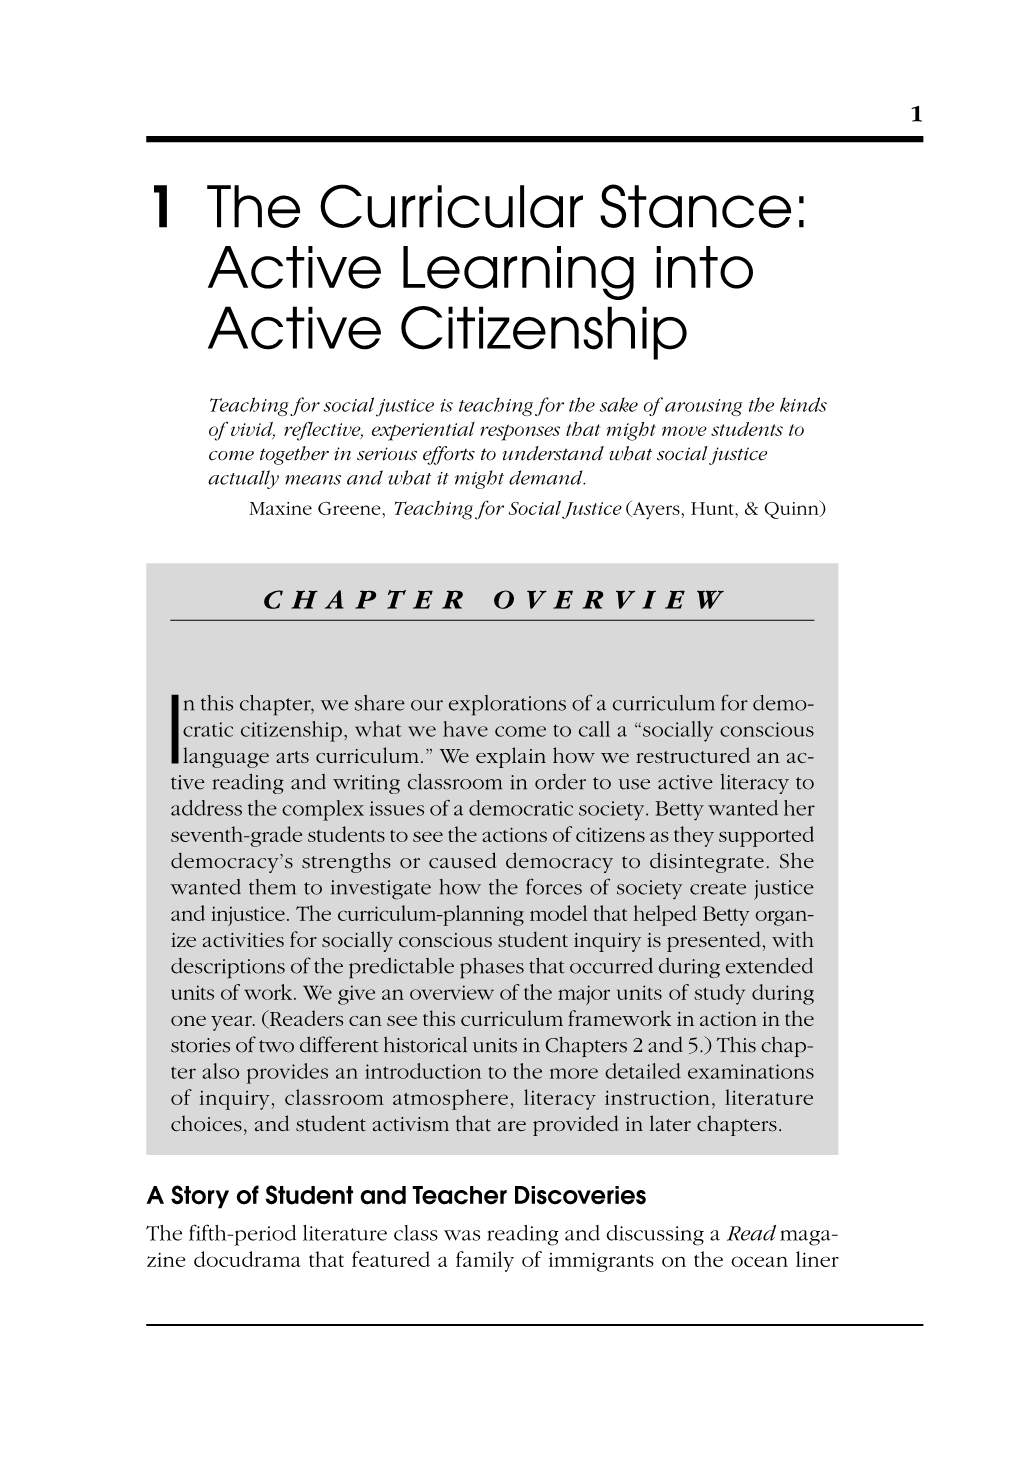 Active Learning Into Active Citizenship 1 1 the Curricular Stance: Active Learning Into Active Citizenship